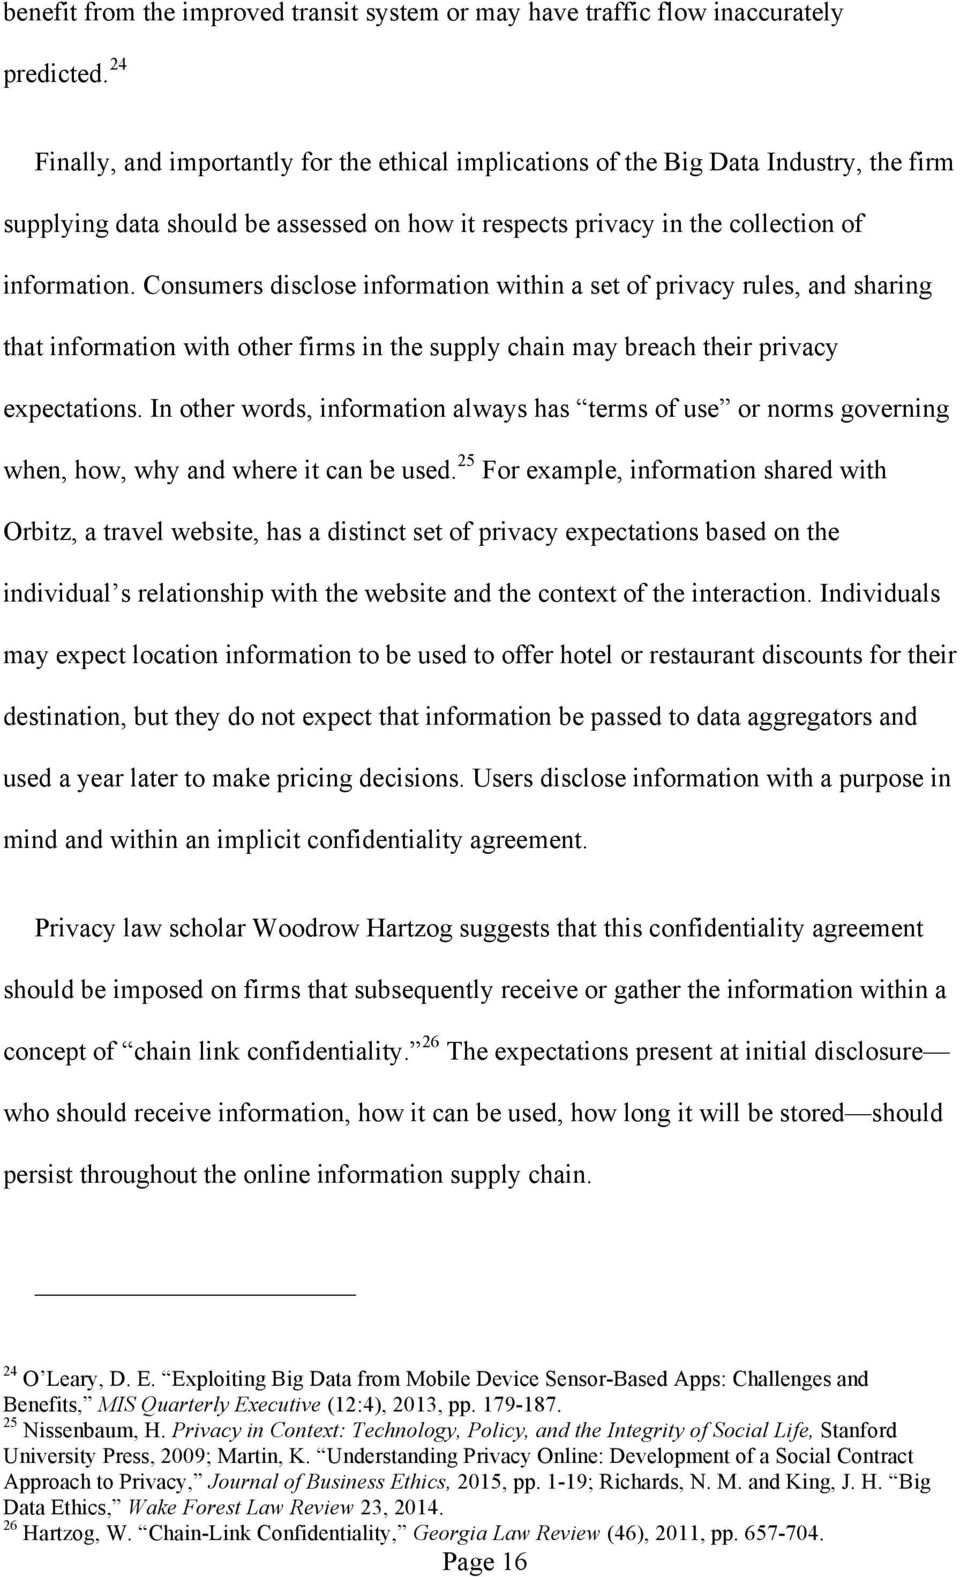 Consumers disclose information within a set of privacy rules, and sharing that information with other firms in the supply chain may breach their privacy expectations.